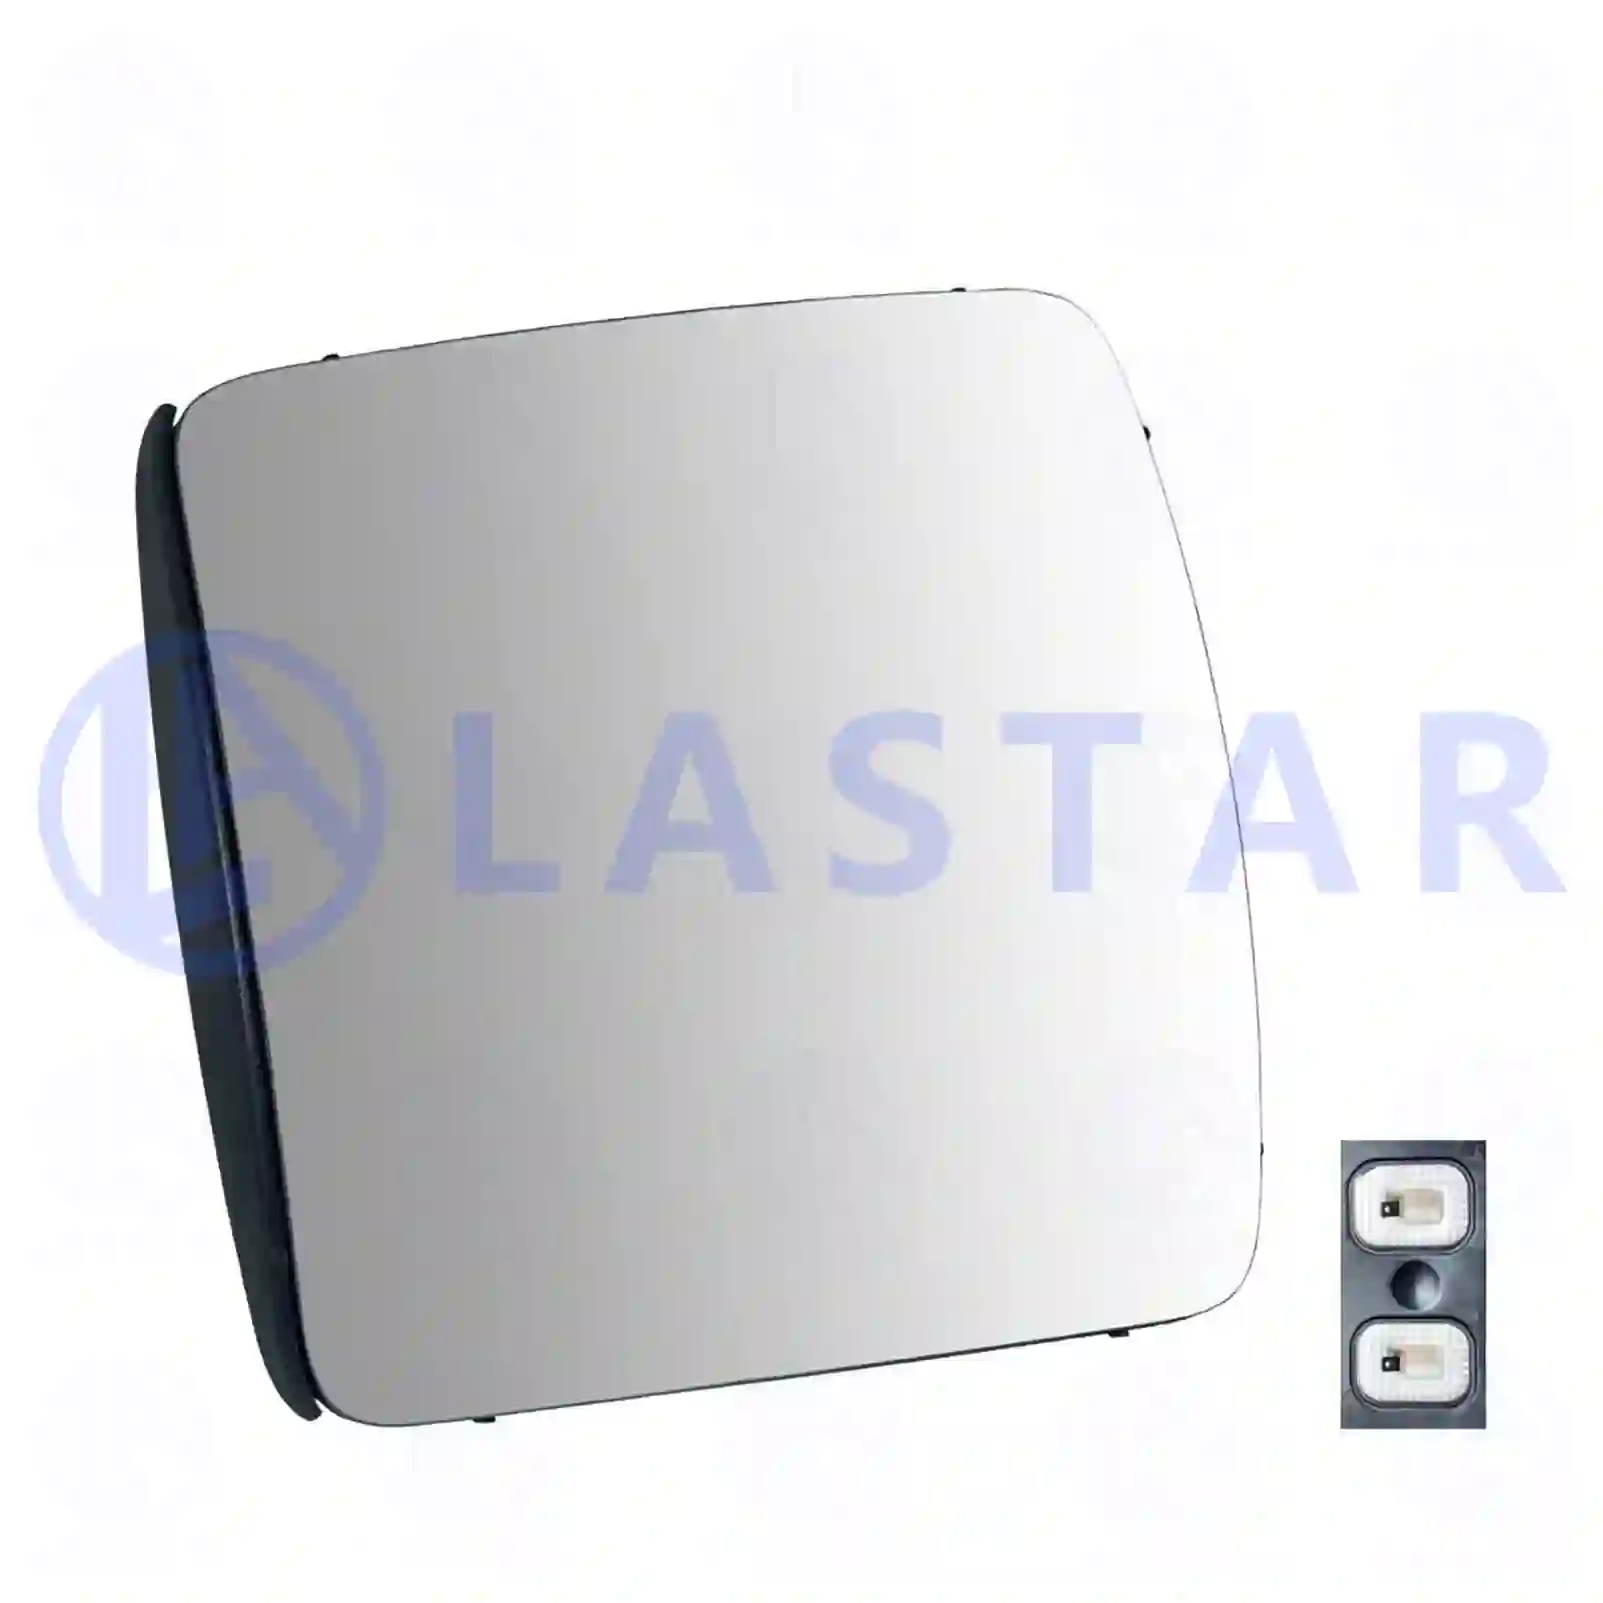 Mirror glass, wide view mirror, 77721253, 82356824 ||  77721253 Lastar Spare Part | Truck Spare Parts, Auotomotive Spare Parts Mirror glass, wide view mirror, 77721253, 82356824 ||  77721253 Lastar Spare Part | Truck Spare Parts, Auotomotive Spare Parts